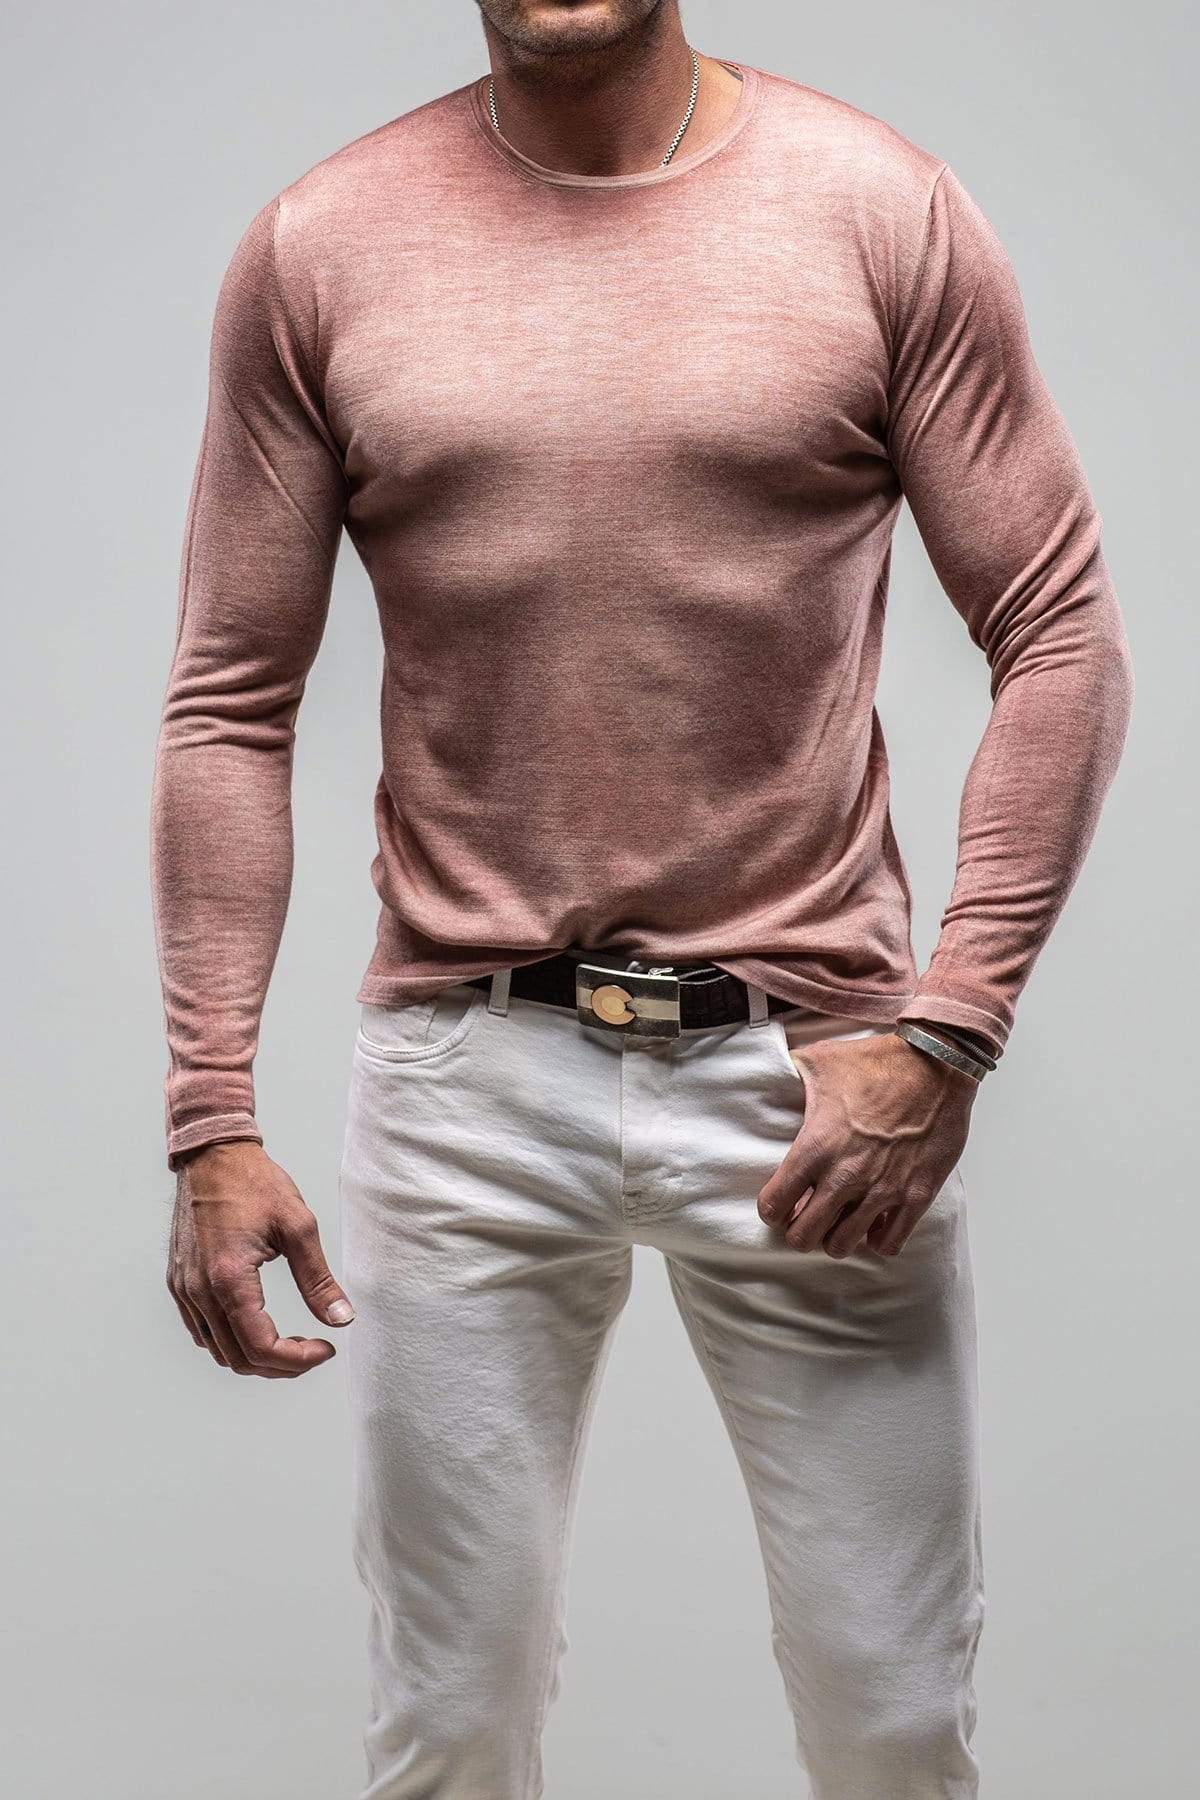 Matteo Cashmere Sweater in Dusty Rose - AXEL'S